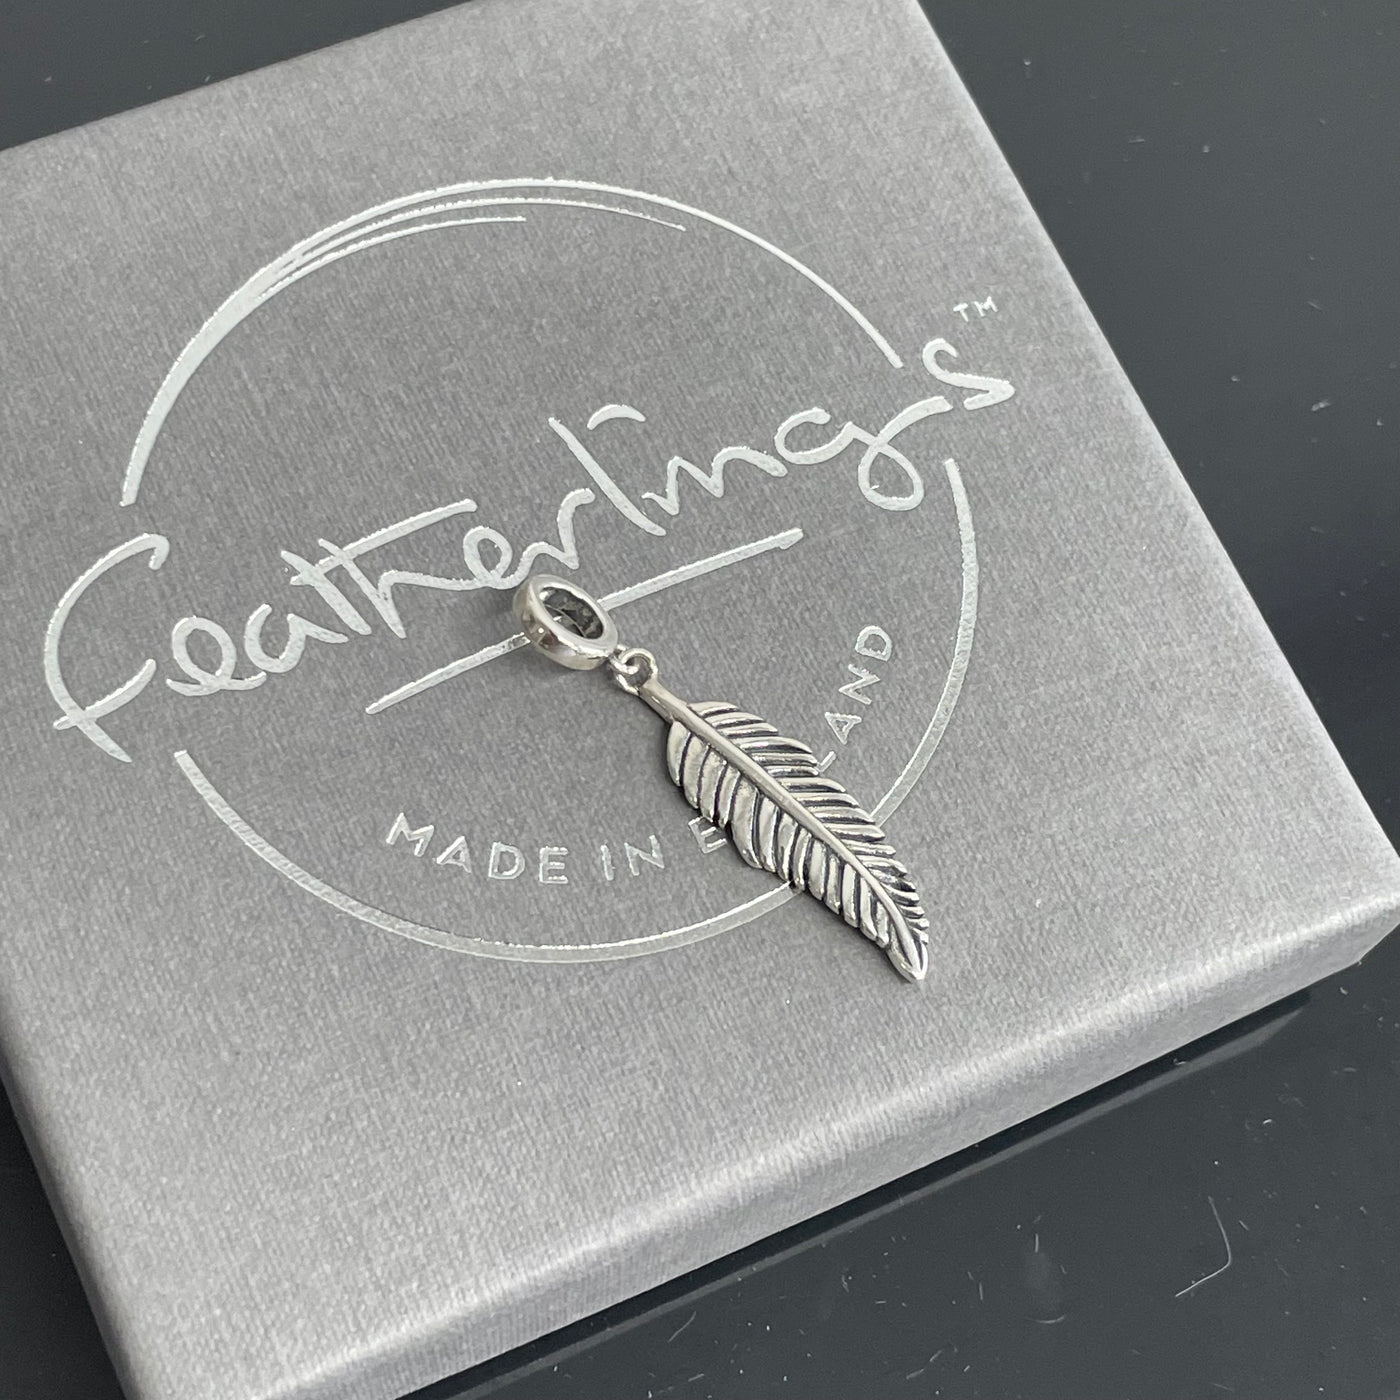 Large Feather Charm | Photo Charms | Featherlings UK